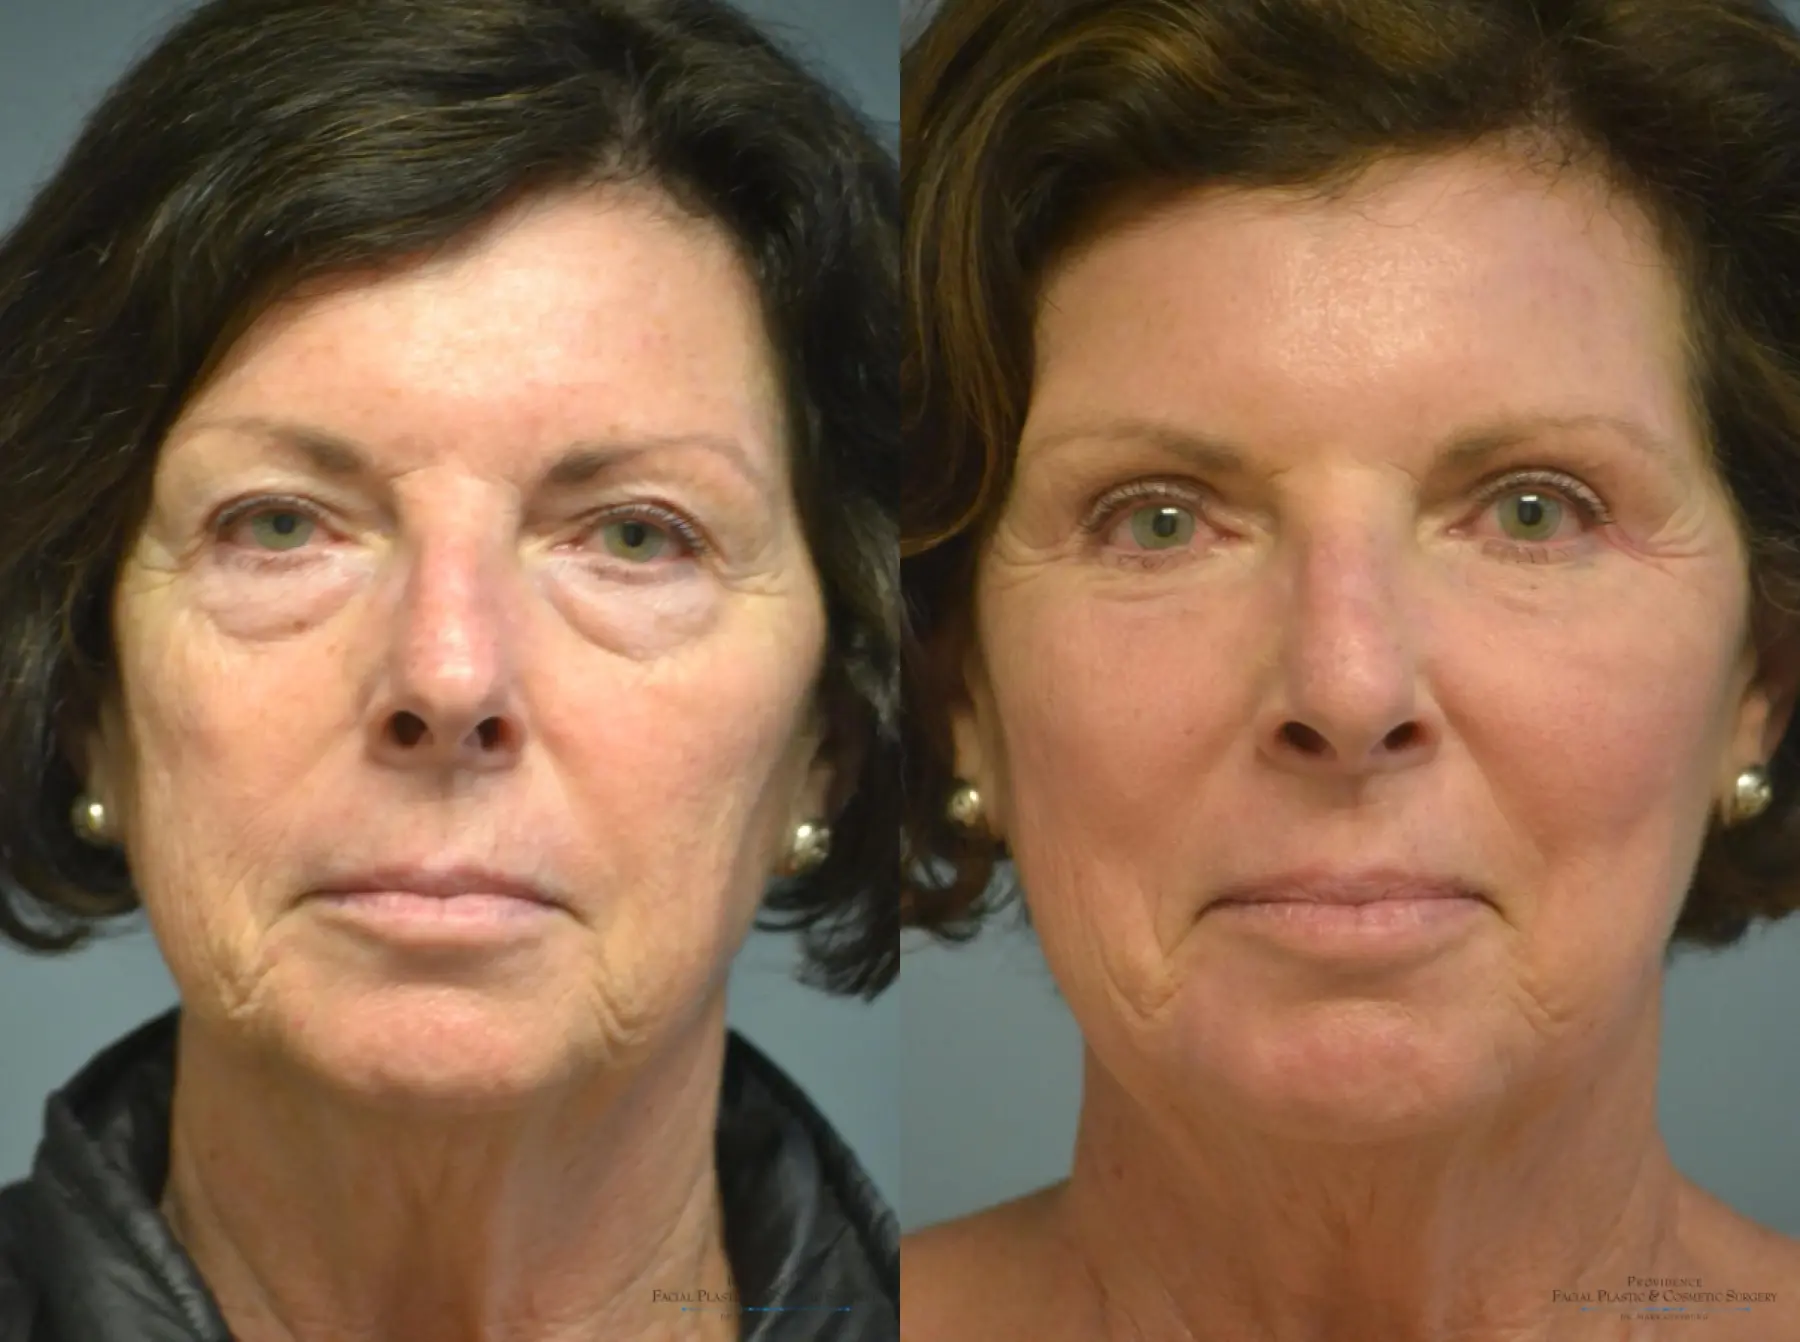 Blepharoplasty: Patient 3 - Before and After  